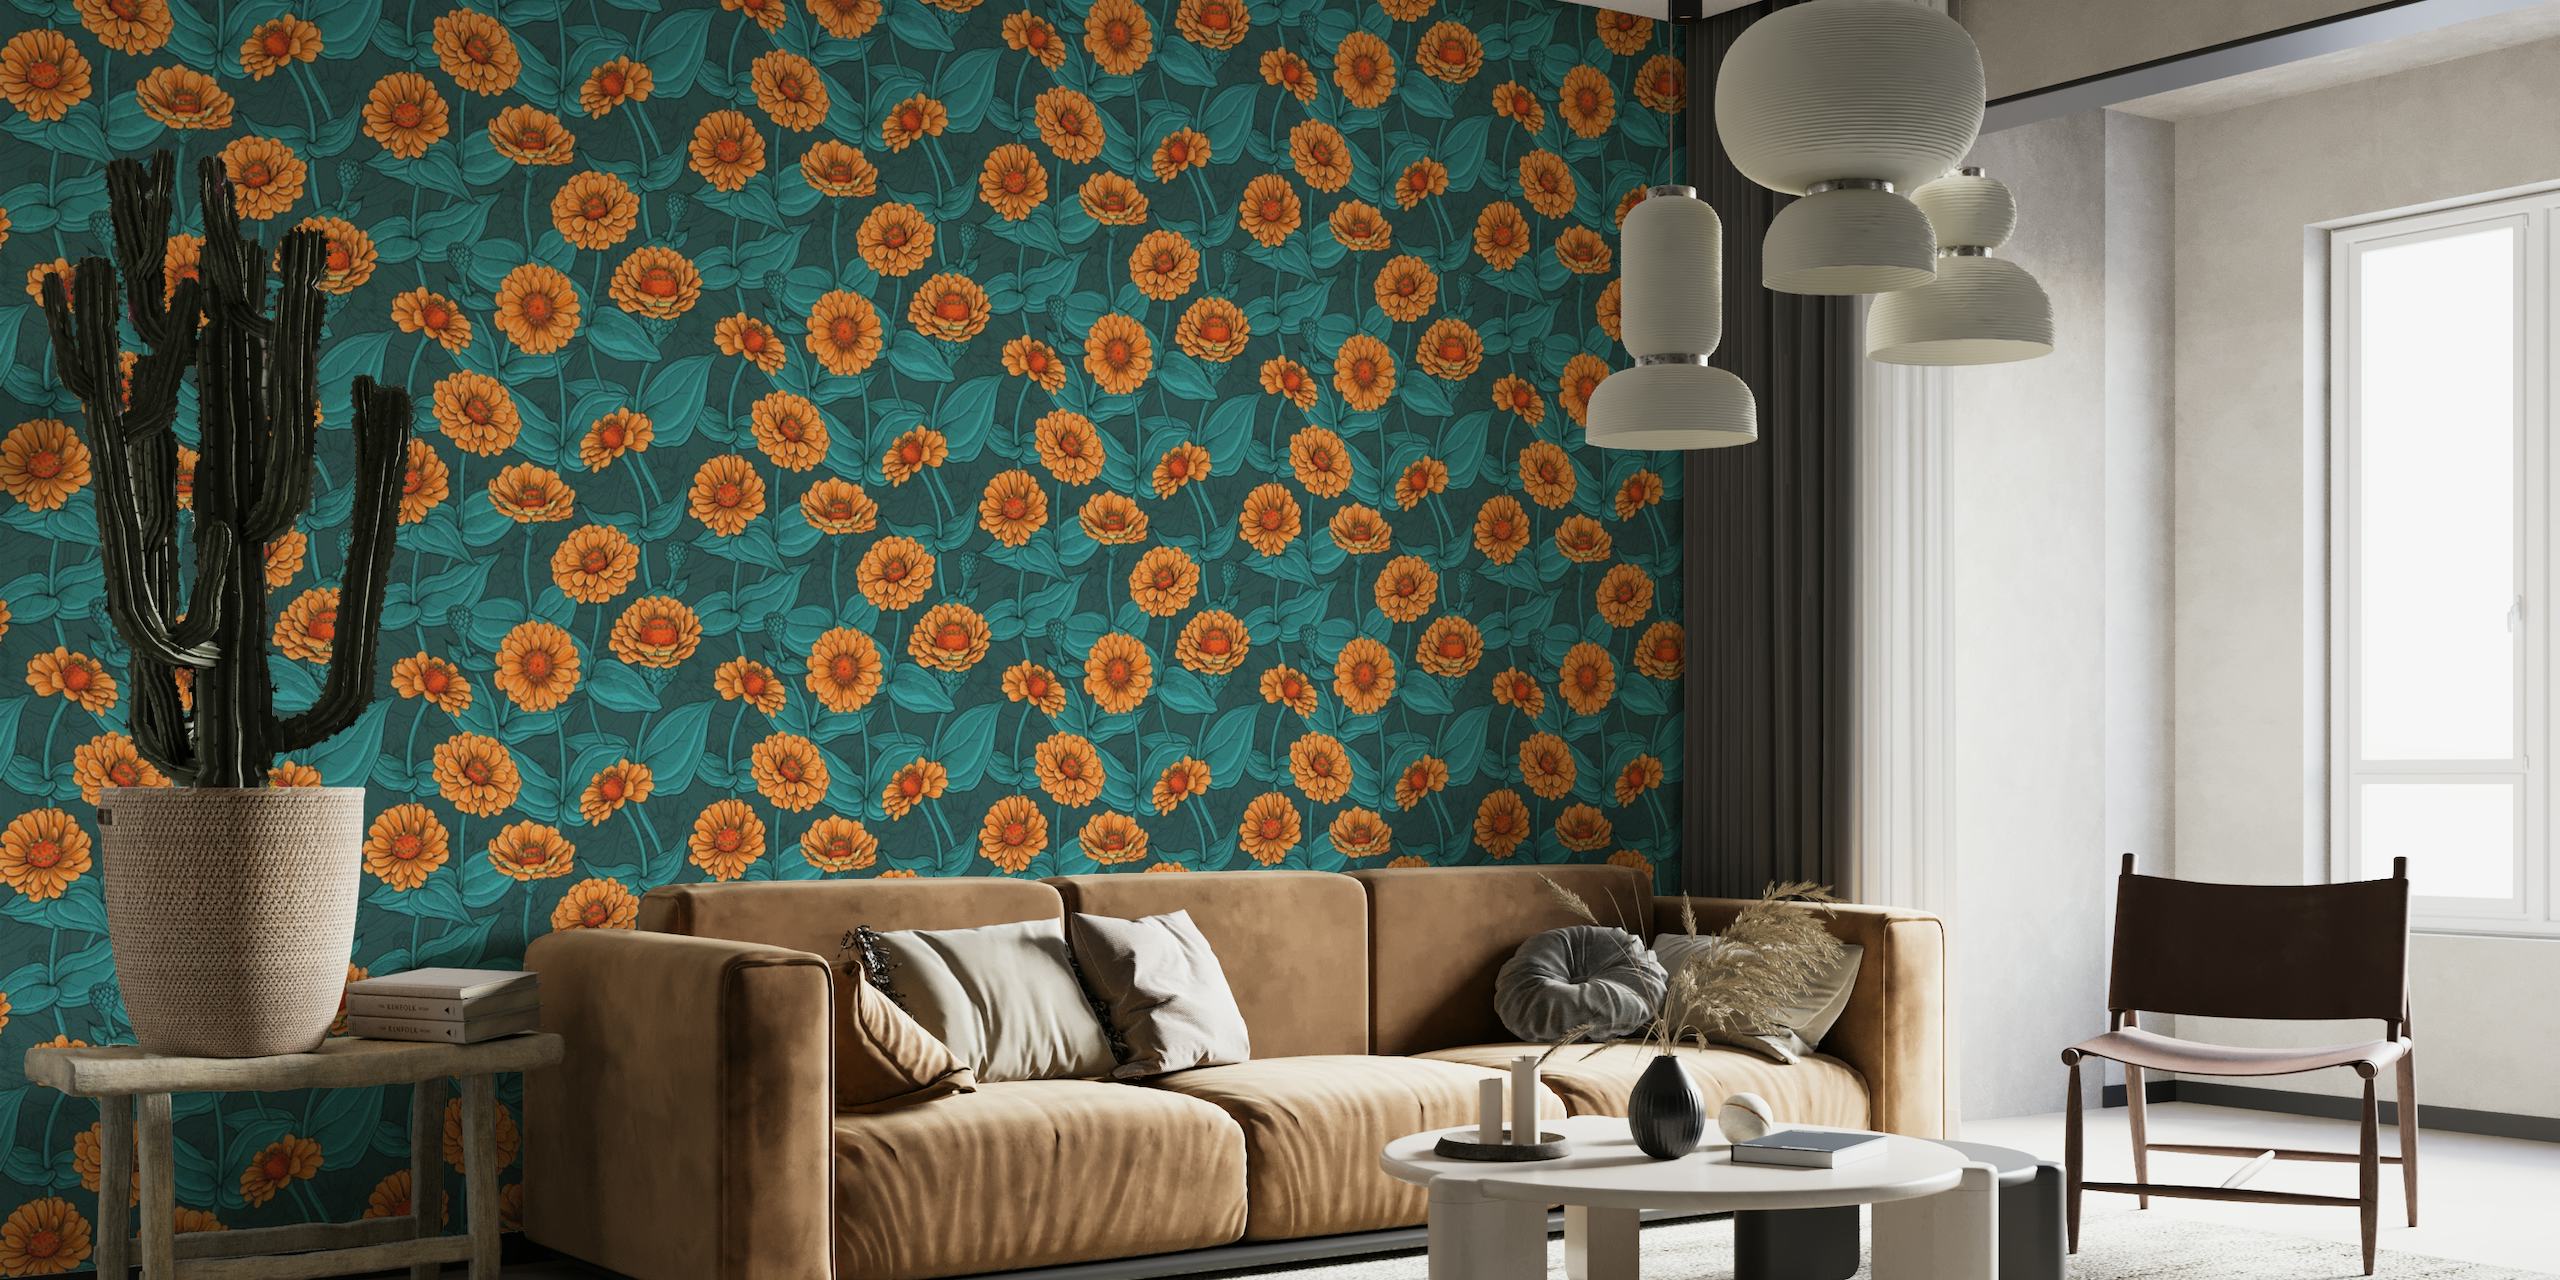 Orange zinnia flowers with blue leaves wall mural on a dark blue background